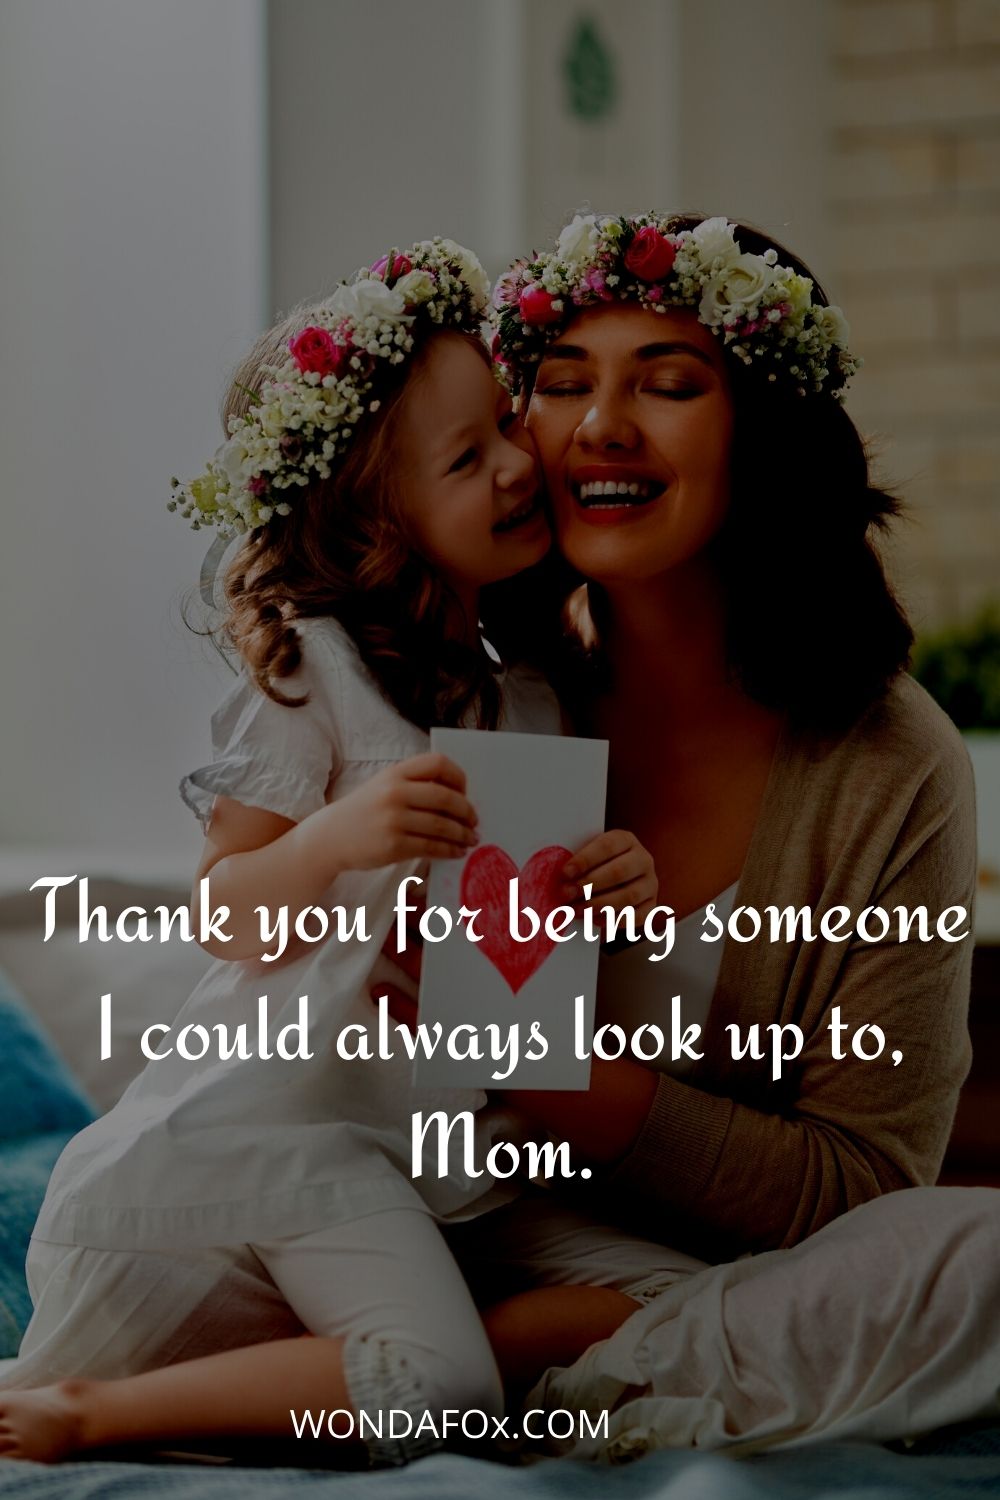 Thank you for being someone I could always look up to, Mom.